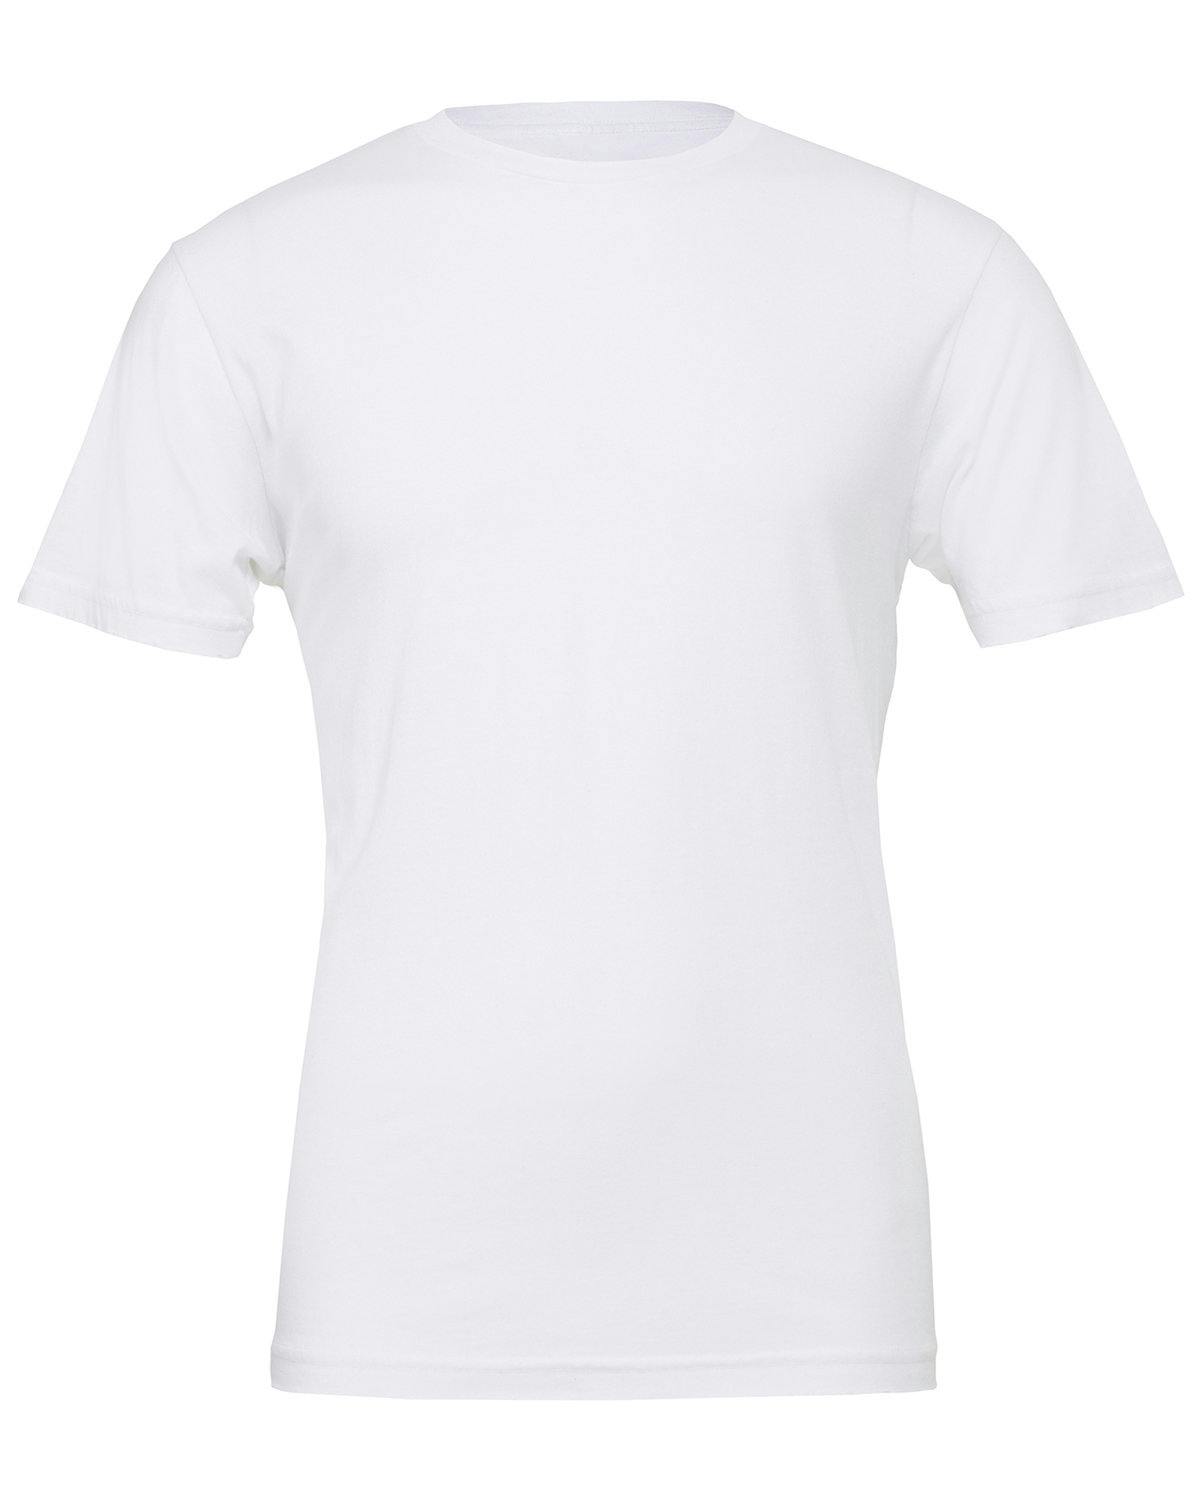 Image for Unisex Jersey T-Shirt